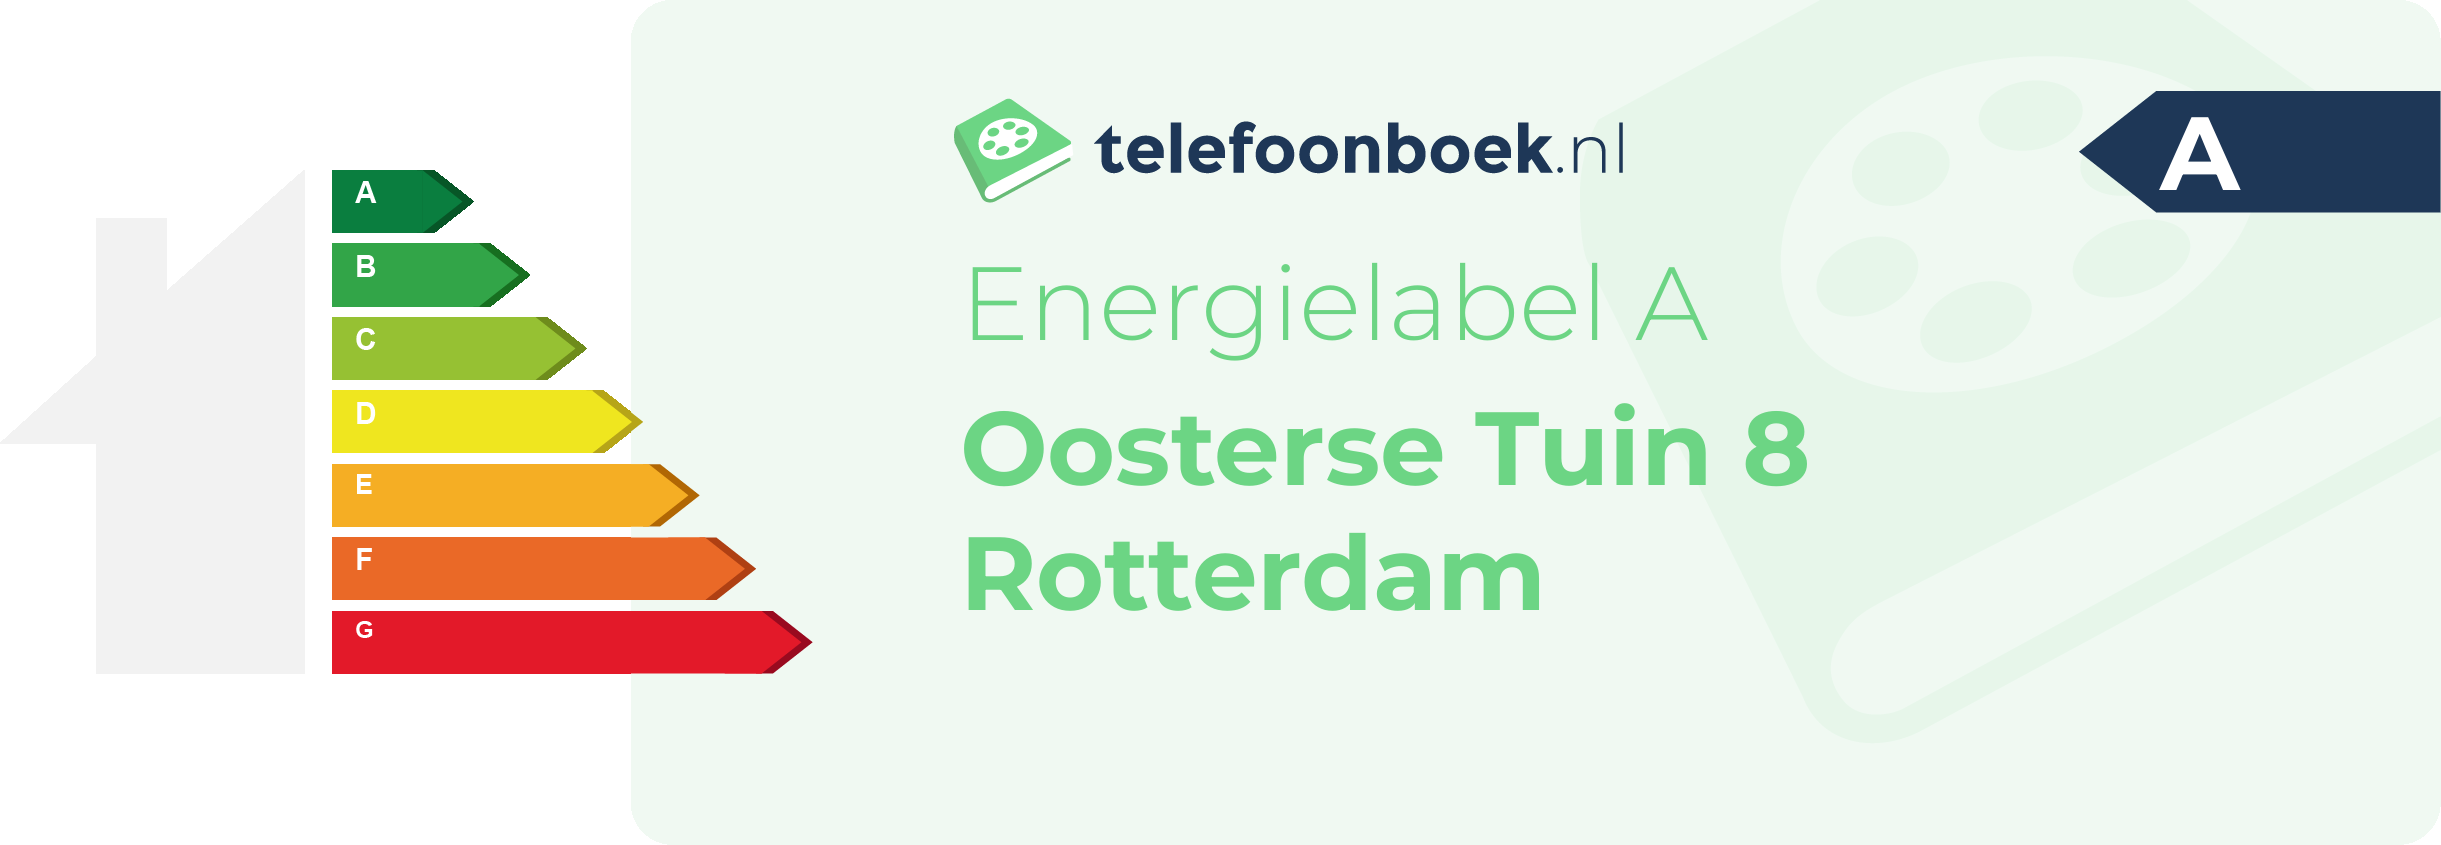 Energielabel Oosterse Tuin 8 Rotterdam